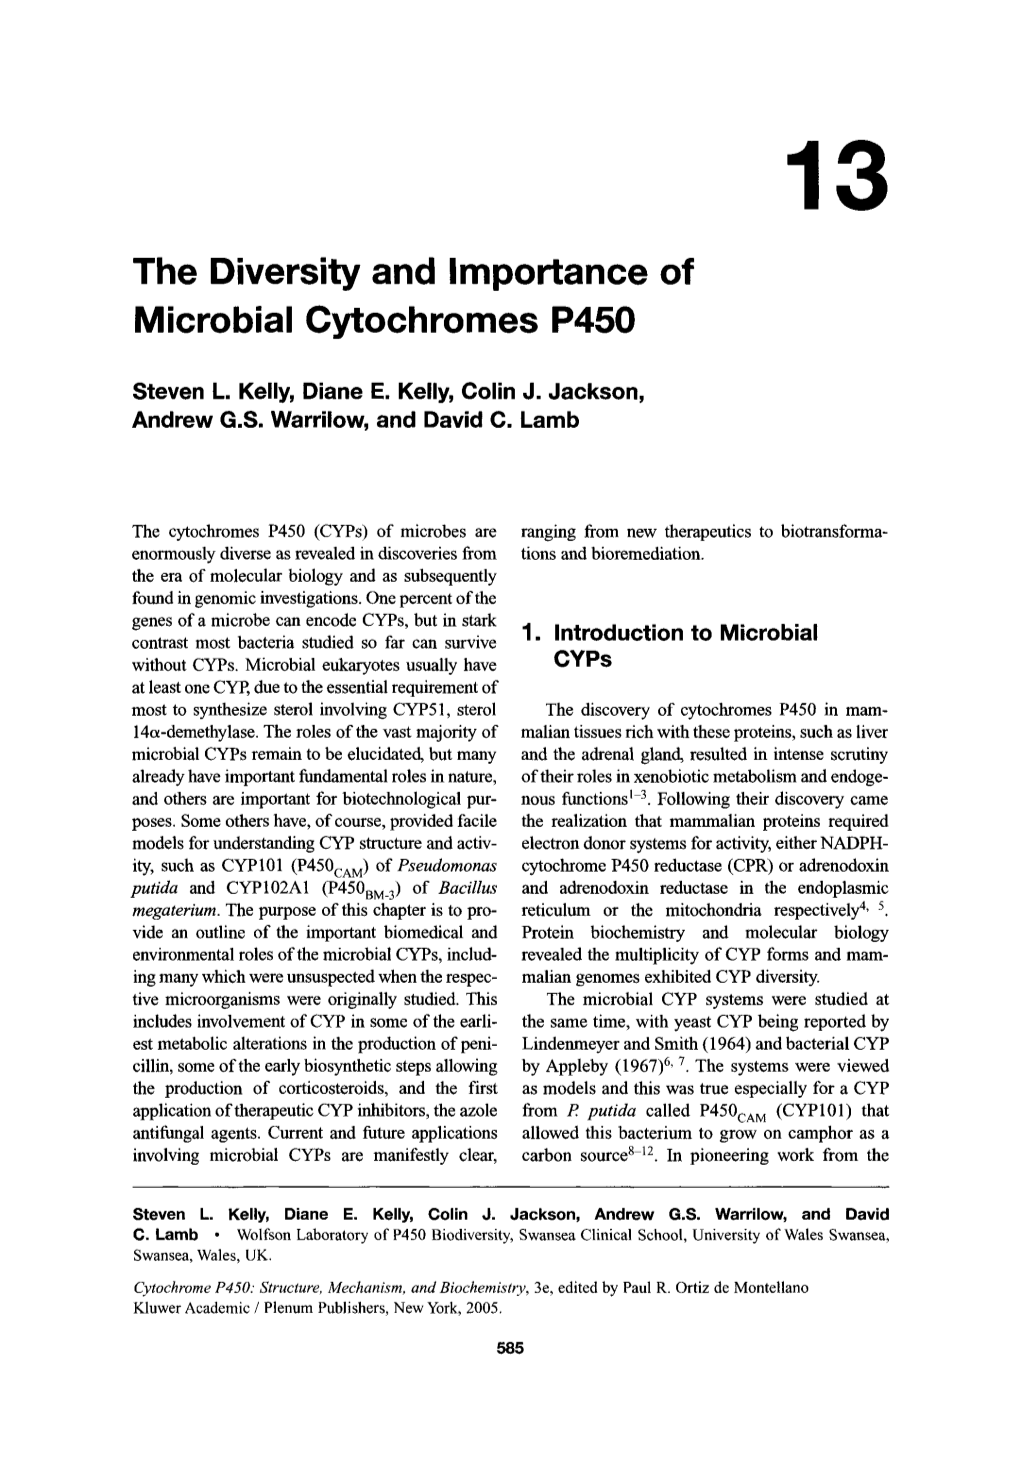 The Diversity and Importance of Microbial Cytochromes P450